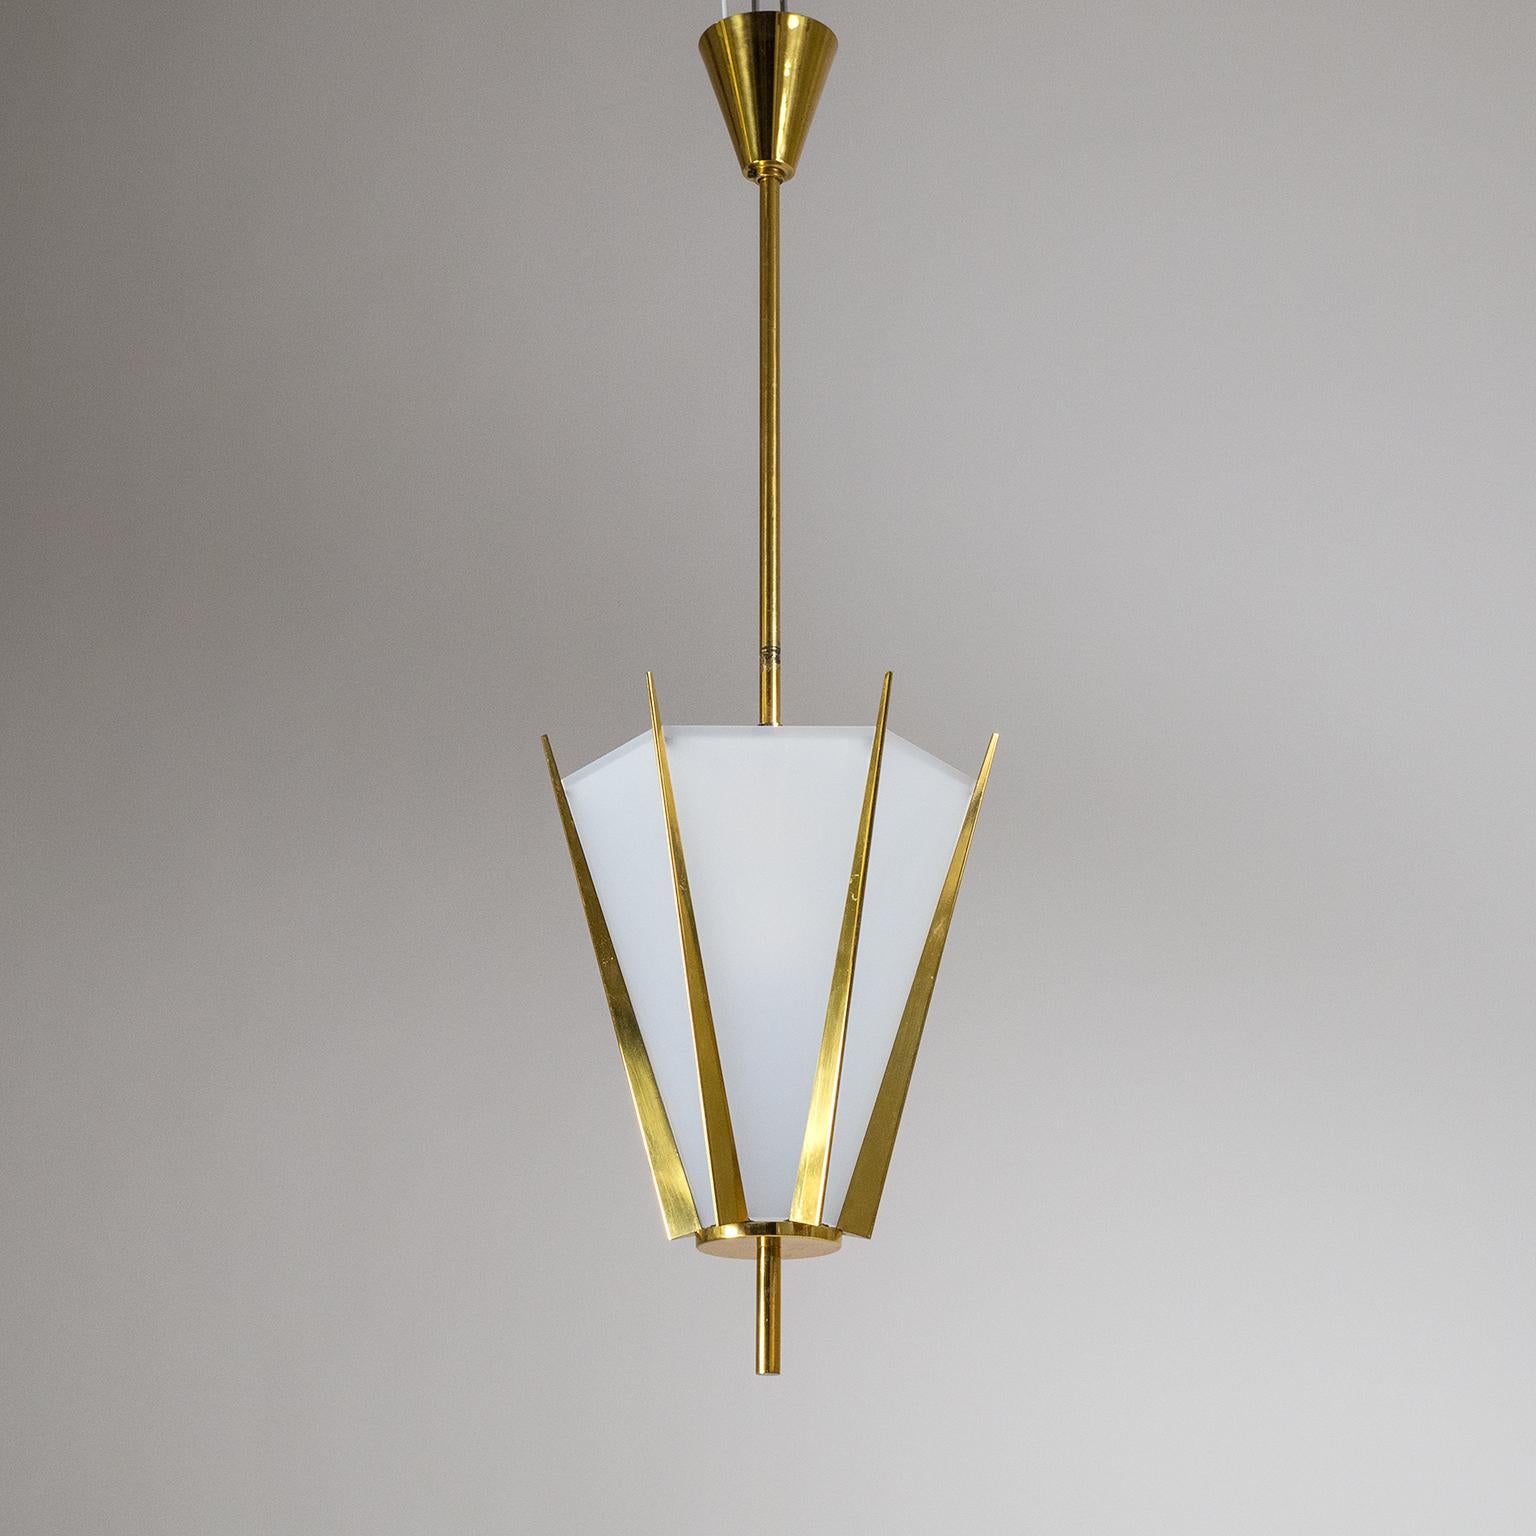 Fabulous French midcentury brass pendant or lantern, circa 1960. Hexagonal crown-like structure in brass with opaque acrylic diffuser panels. This is an extremely well designed and constructed piece with precision-tooled custom elements. Very good